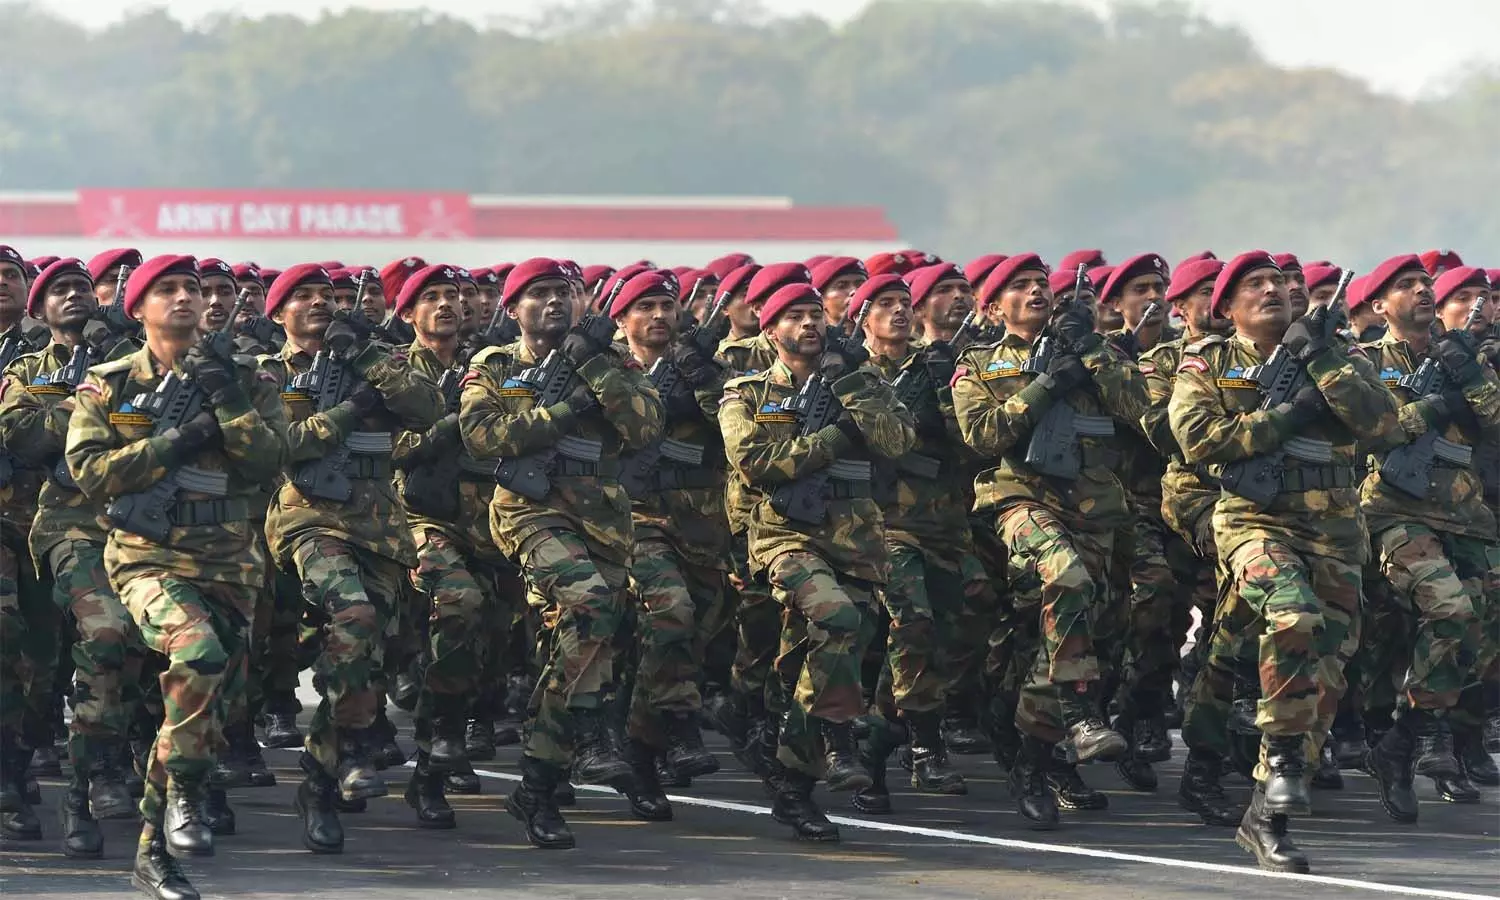 Indian Army common entrance exam scheduled on October 31 cancelled